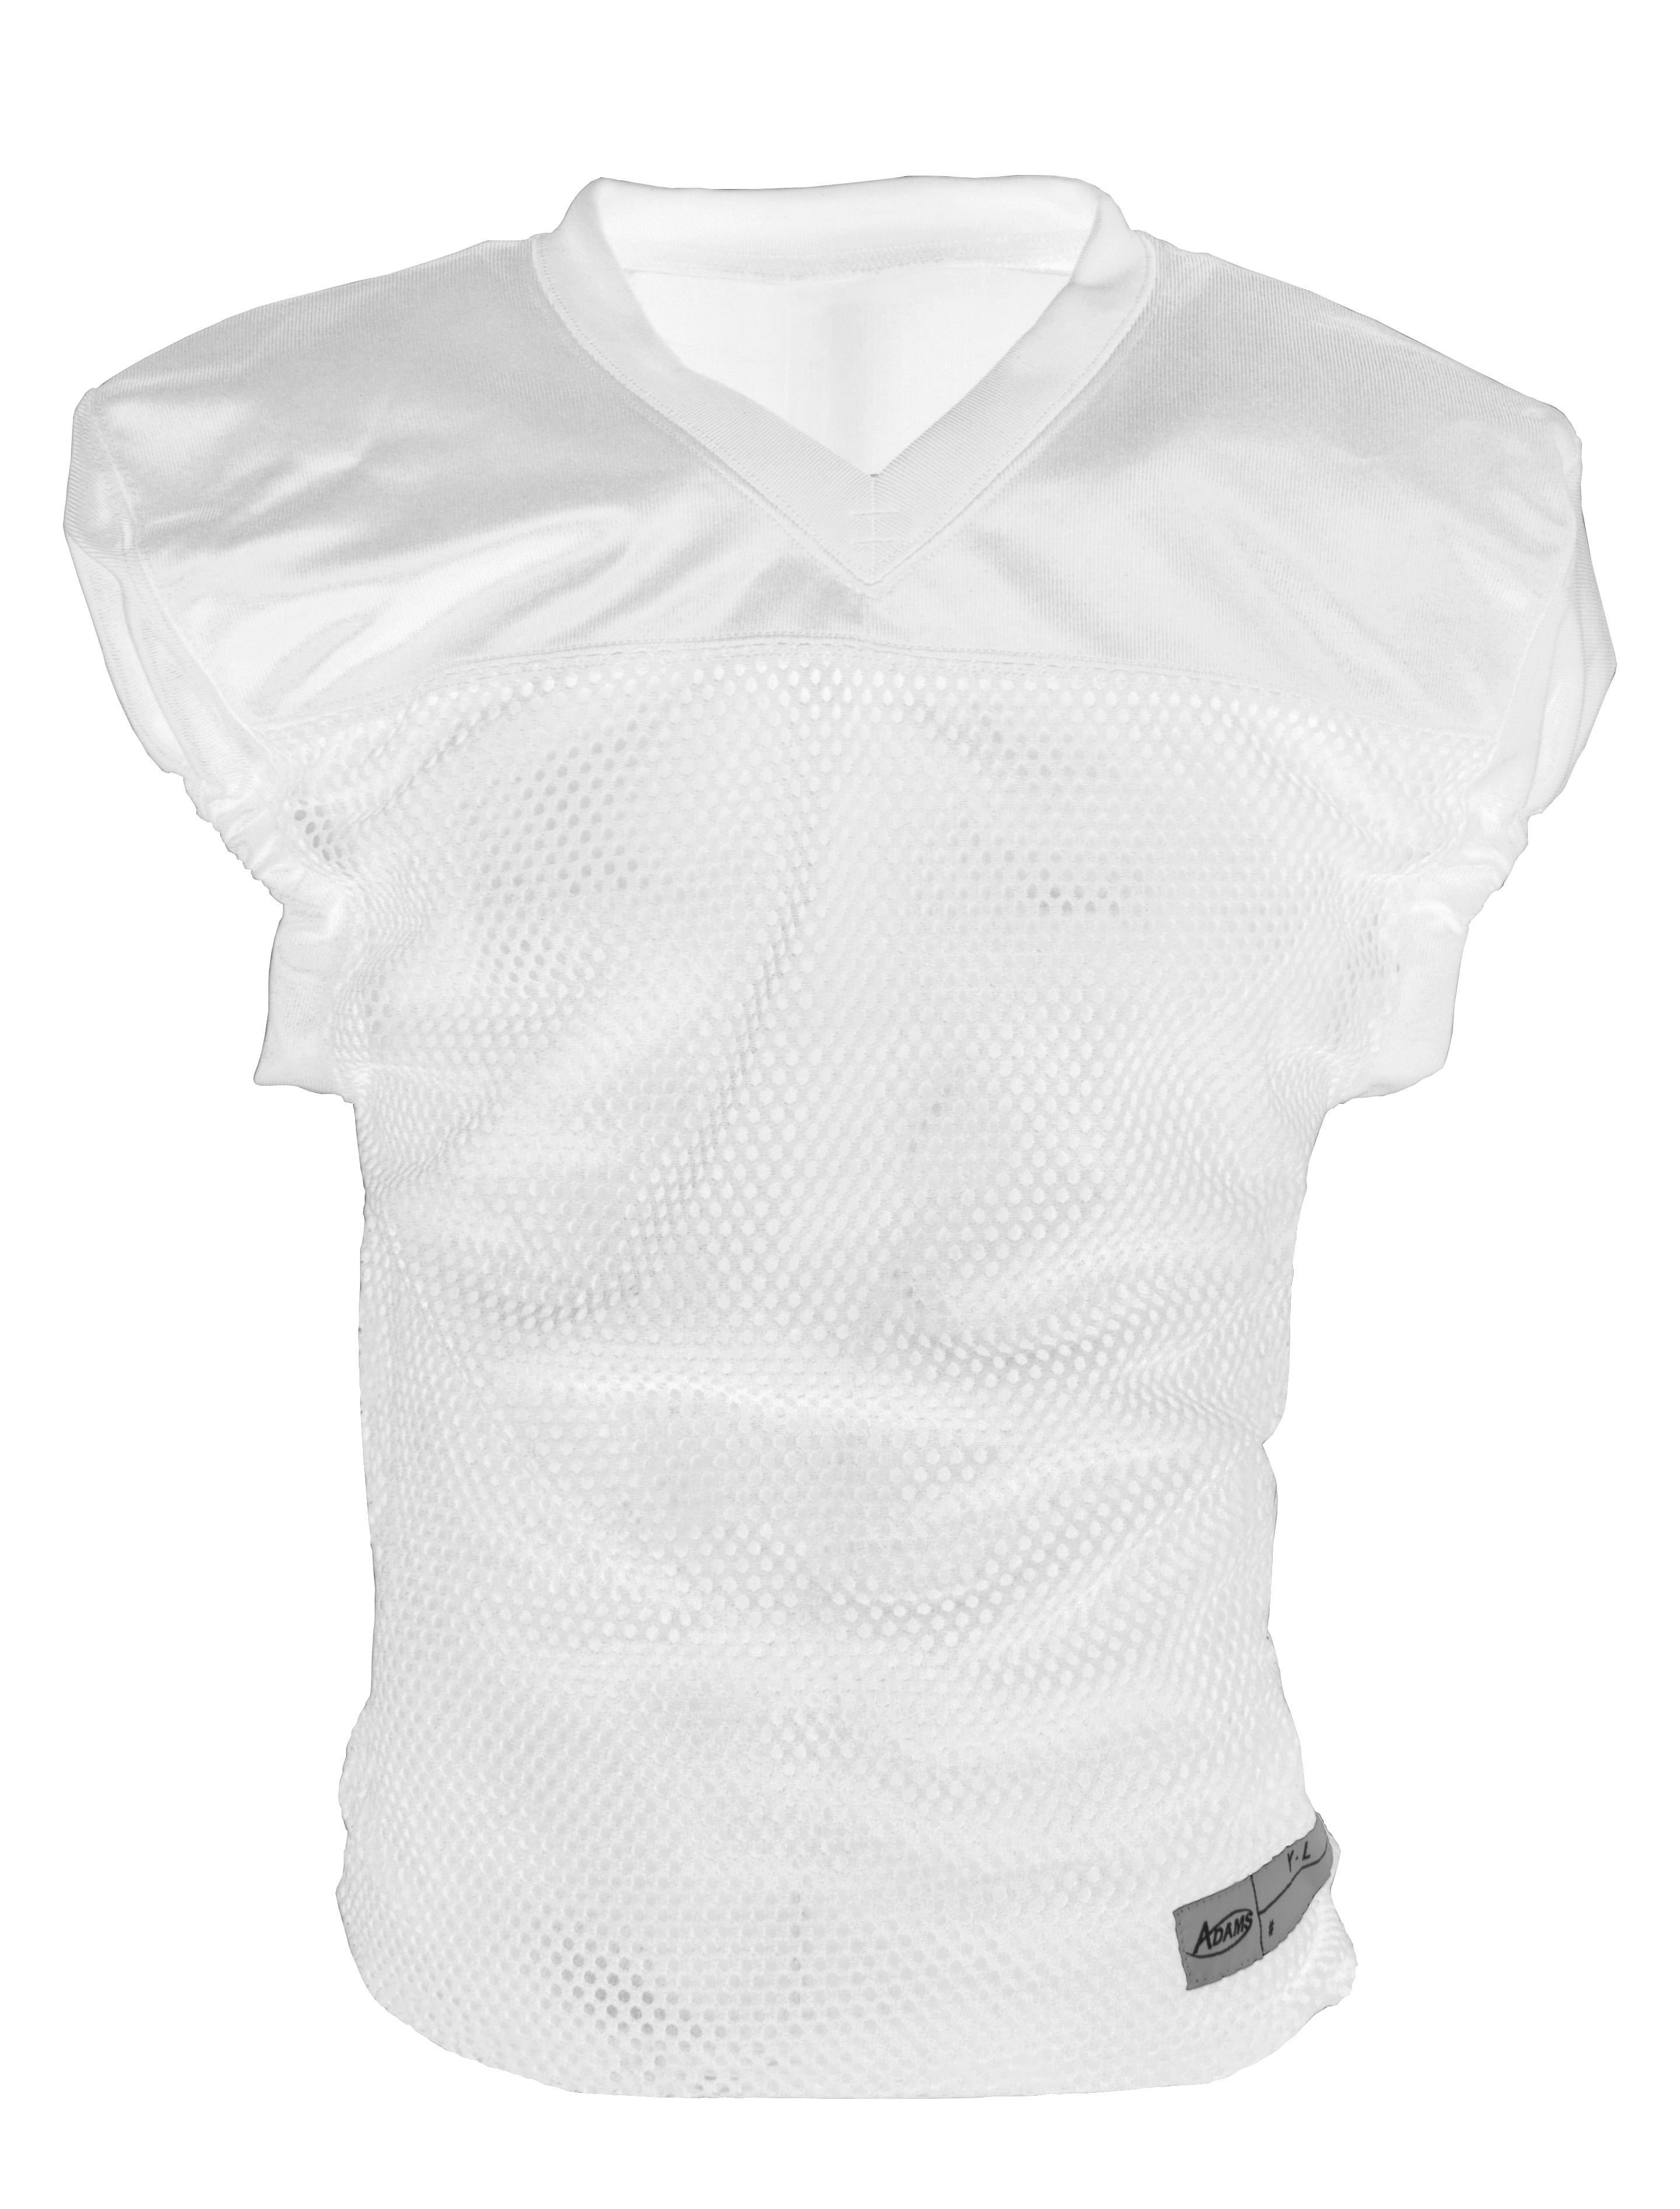 Football Practice Jersey Over Shoulder Pads V Neck Mesh Mens Russell Athletic 